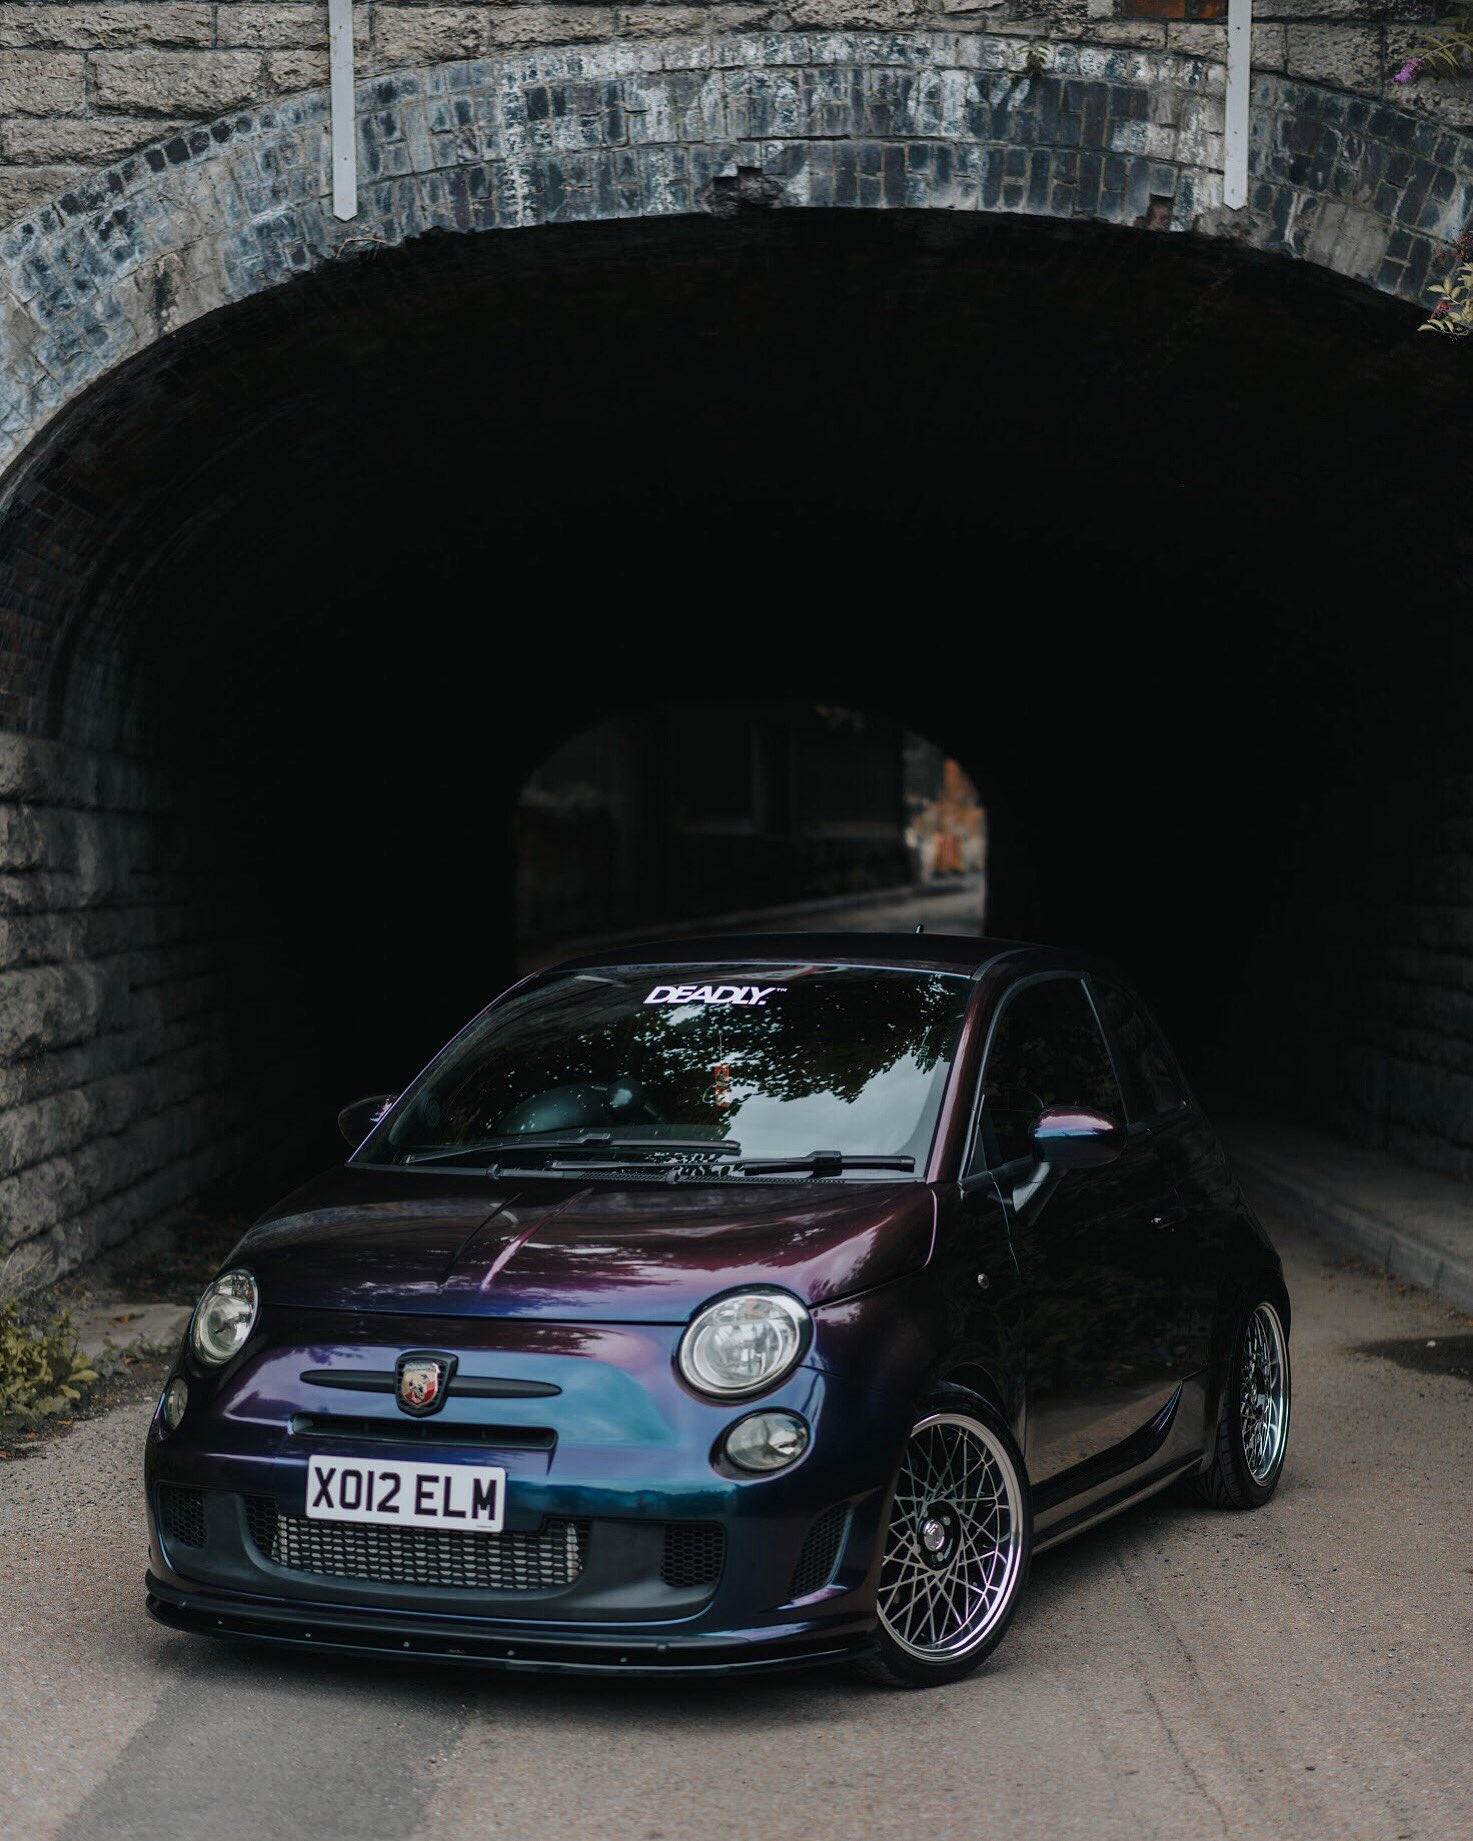 Proberen amateur rijst Vanguard Vehicle Wrapping on Twitter: "Fiat 500 Abarth wrapped in 3M Gloss  Flip Deep Space 🔥🔮 #vehiclewrapping https://t.co/1aIym6Utny" / Twitter